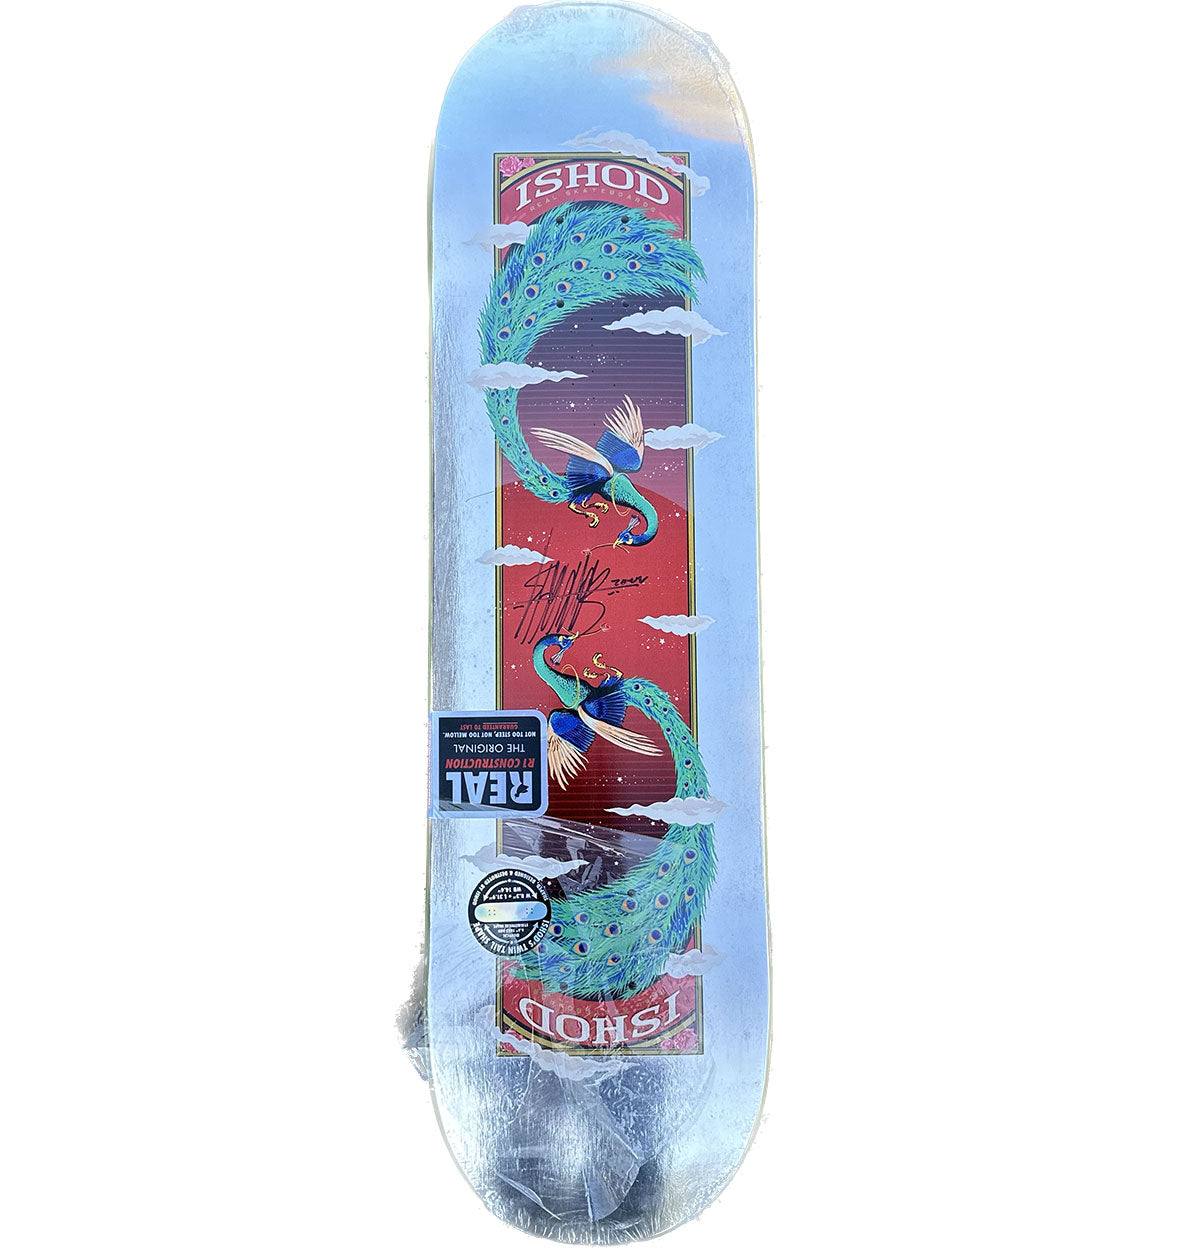 Real Skateboards - Feathers Twin-Tail - Exclusive, Signed